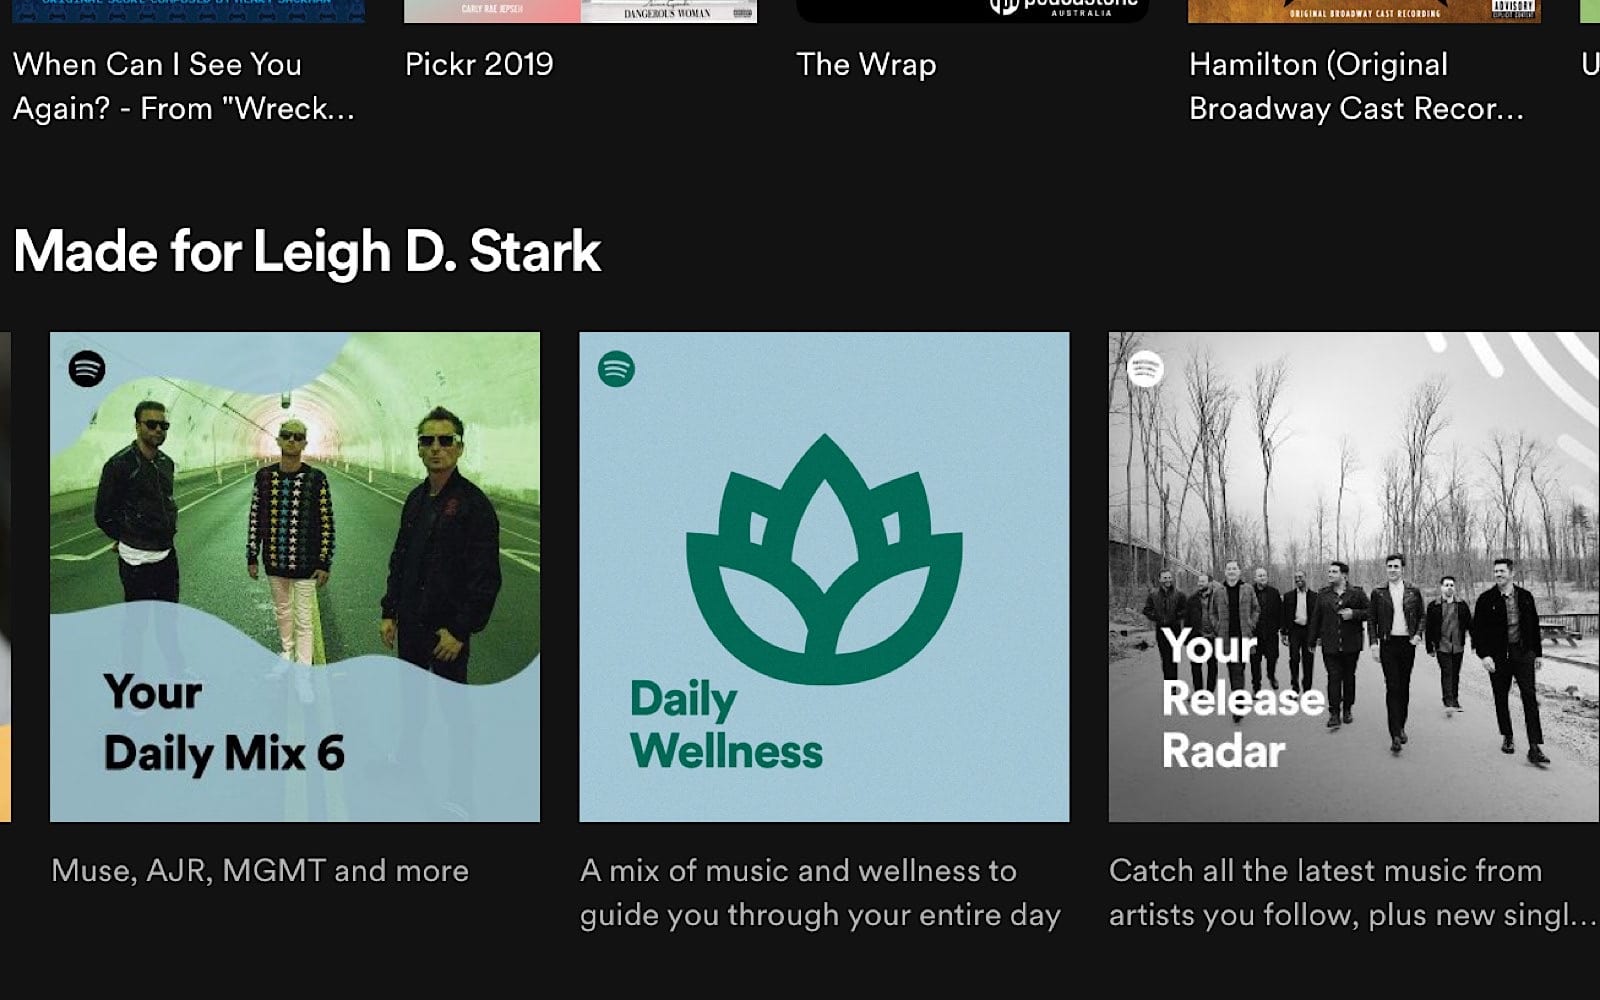 Spotify Daily Wellness feature available to Spotify customers on both Free and Premum.